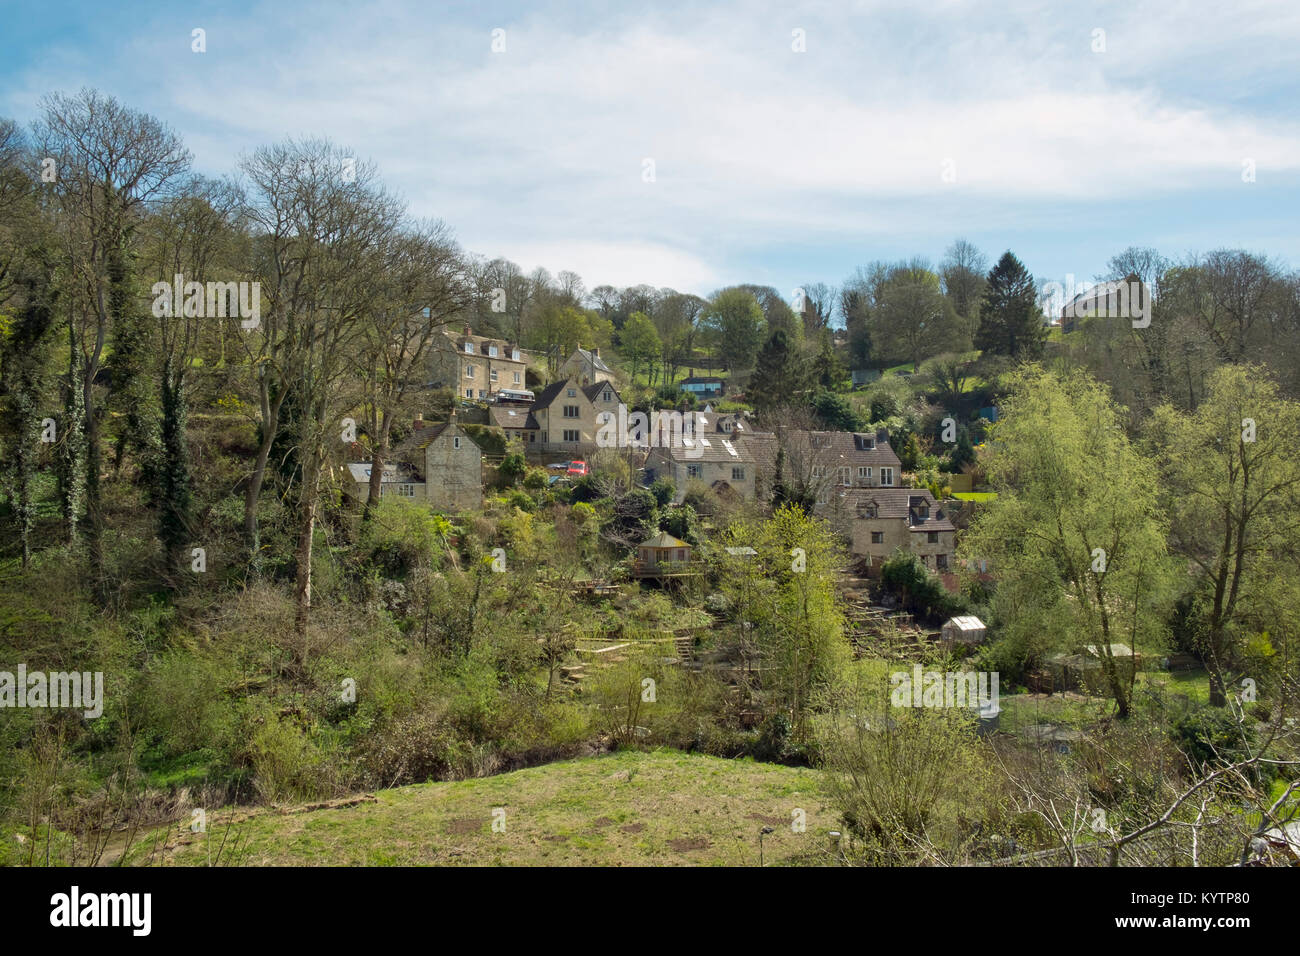 Picturesque hillside cottages in one of Nailsworth's valleys, Cotswolds, Gloucestershire, UK Stock Photo